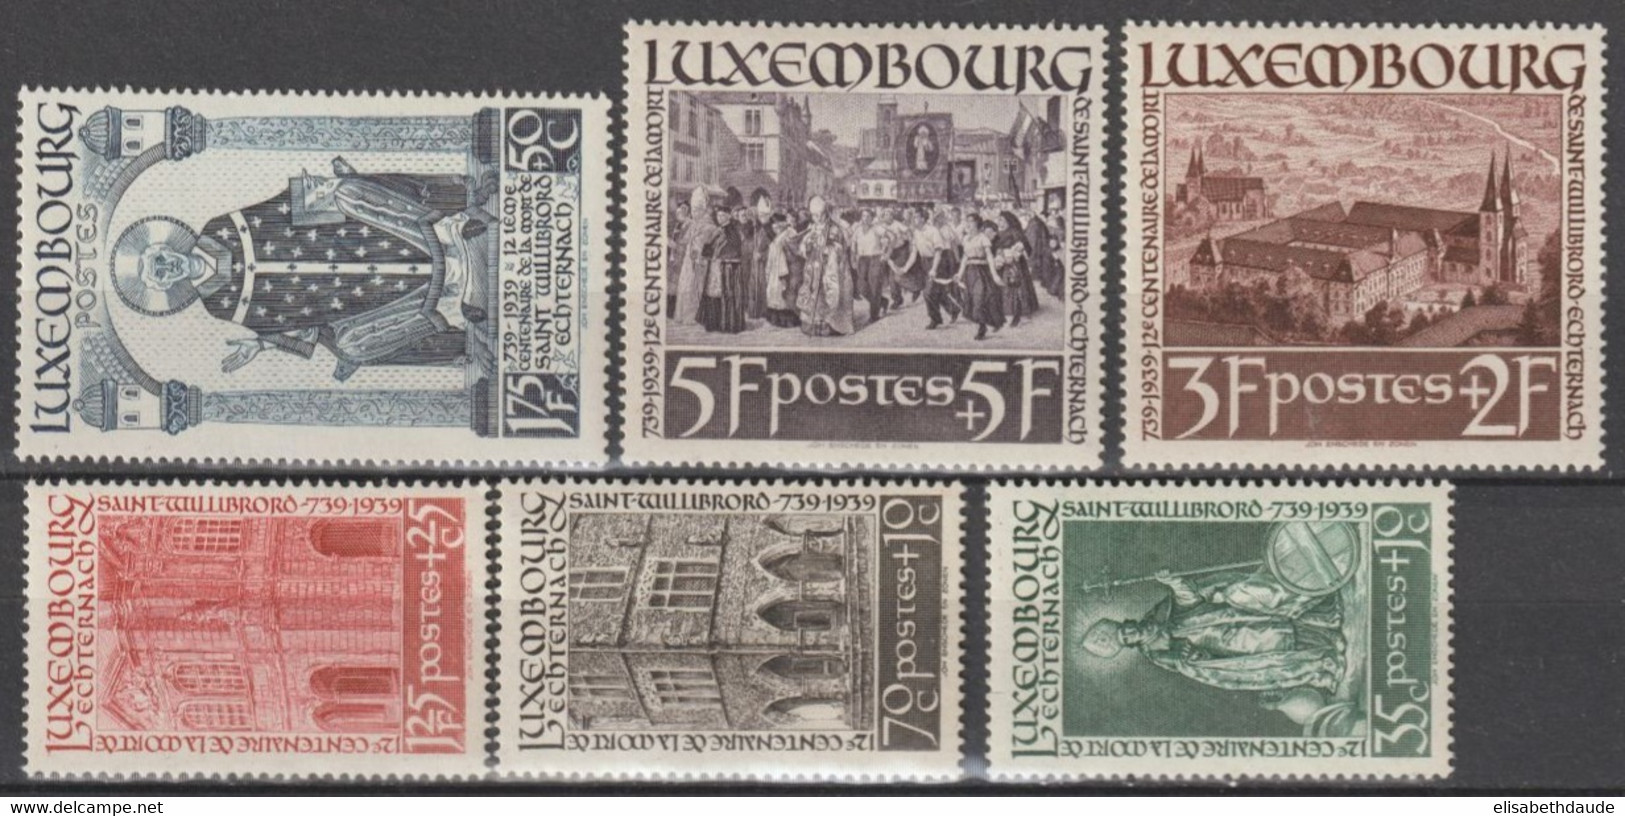 LUXEMBOURG - 1938 - SERIE COMPLETE YVERT N°300/305 * MLH  - COTE = 25 EUR. - Neufs